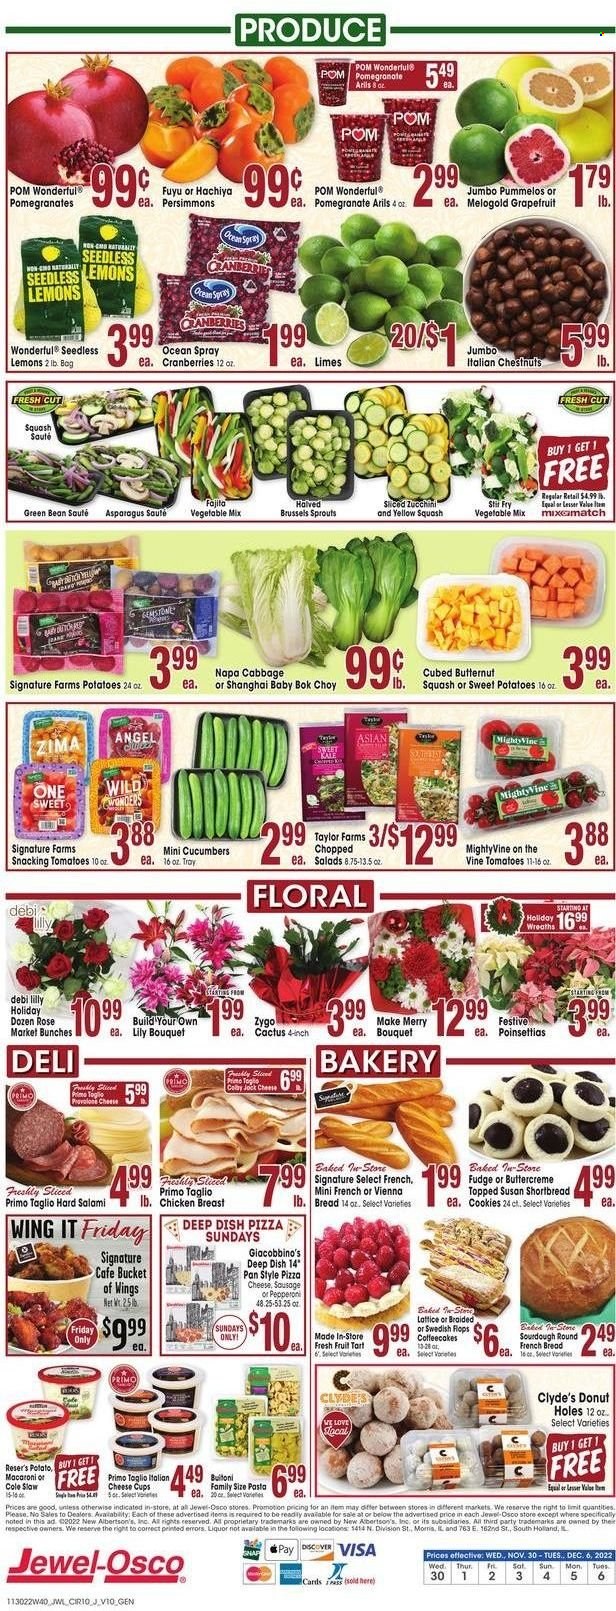 thumbnail - Jewel Osco Flyer - 11/30/2022 - 12/06/2022 - Sales products - bread, tart, french bread, donut holes, coffee cake, fruit tart, asparagus, bok choy, cabbage, cucumber, sweet potato, kale, potatoes, brussel sprouts, yellow squash, grapefruits, limes, persimmons, pizza, macaroni, pasta, fajita, Buitoni, salami, sausage, pepperoni, Colby cheese, cheese cup, Provolone, cookies, fudge, cranberries, chestnuts, wine, rosé wine, chicken breasts, tray, pan, cup, poinsettia, cactus, bunches, bouquet, rose, butternut squash, pomegranate, lemons. Page 9.